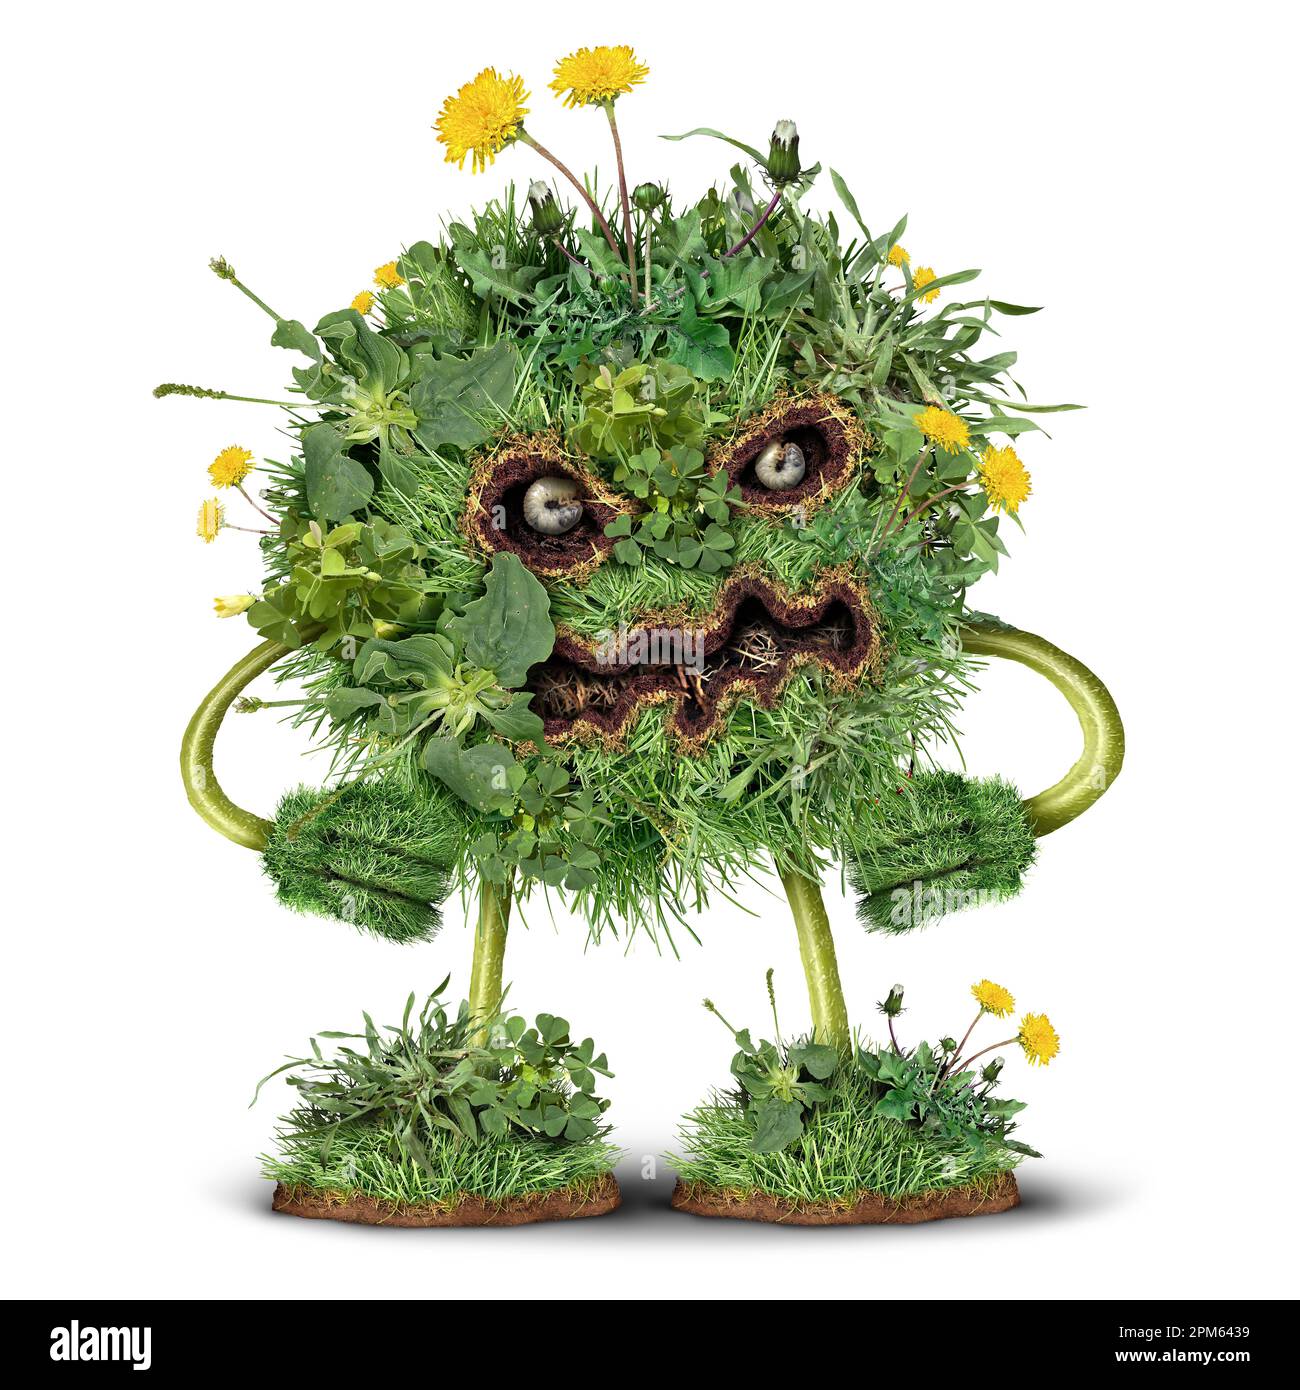 Lawn Weeds character and weed monster as dandelion with clover crab grass pest weeds problem as a symbol for herbicide use in the garden or gardening Stock Photo